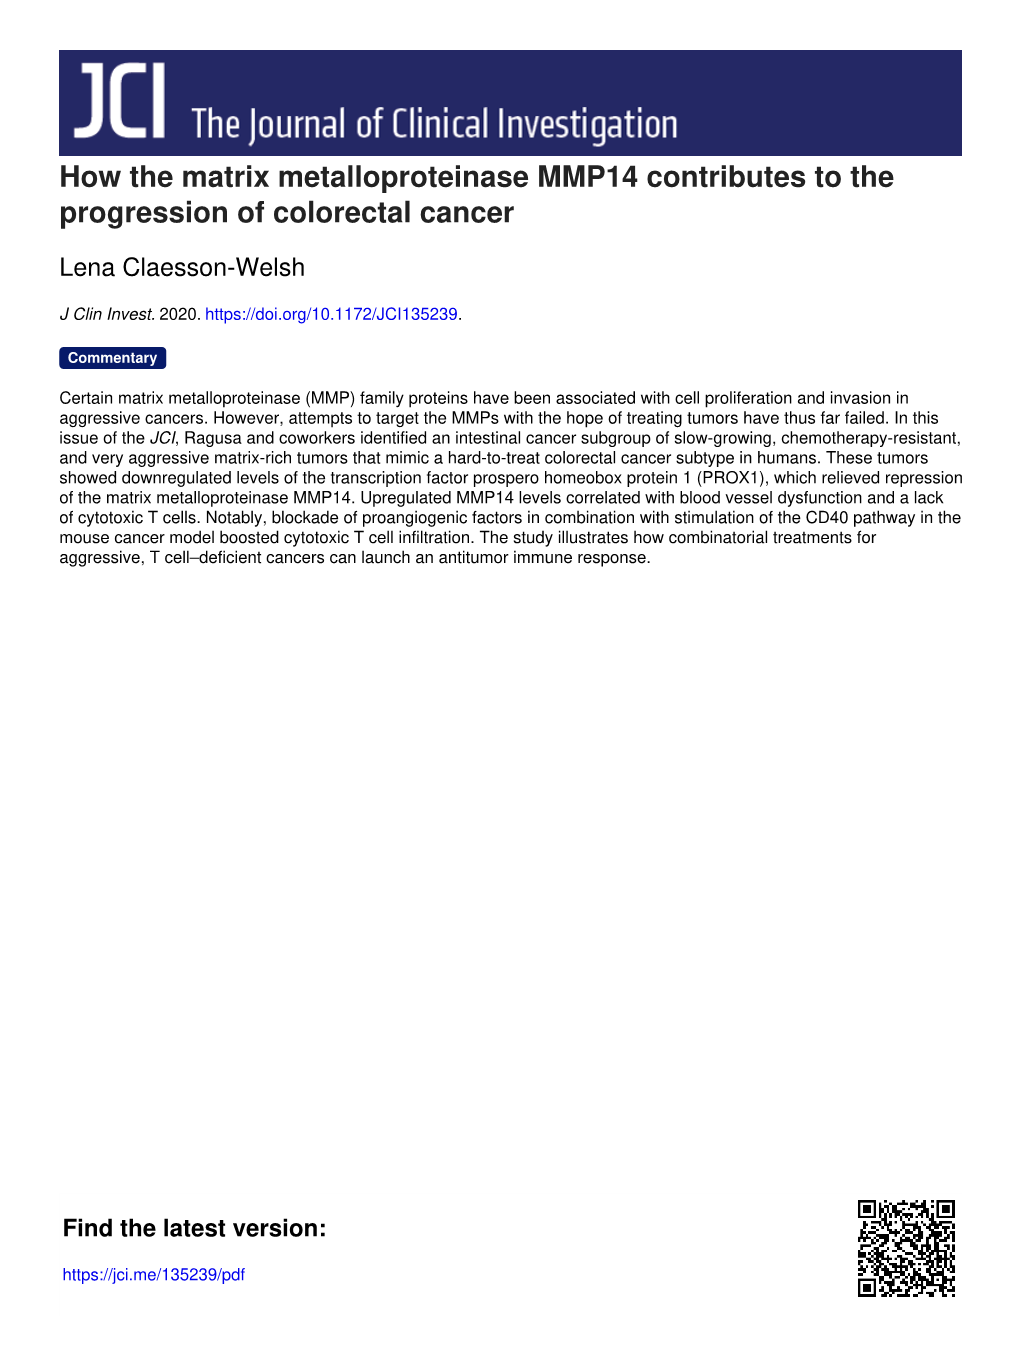 How the Matrix Metalloproteinase MMP14 Contributes to the Progression of Colorectal Cancer